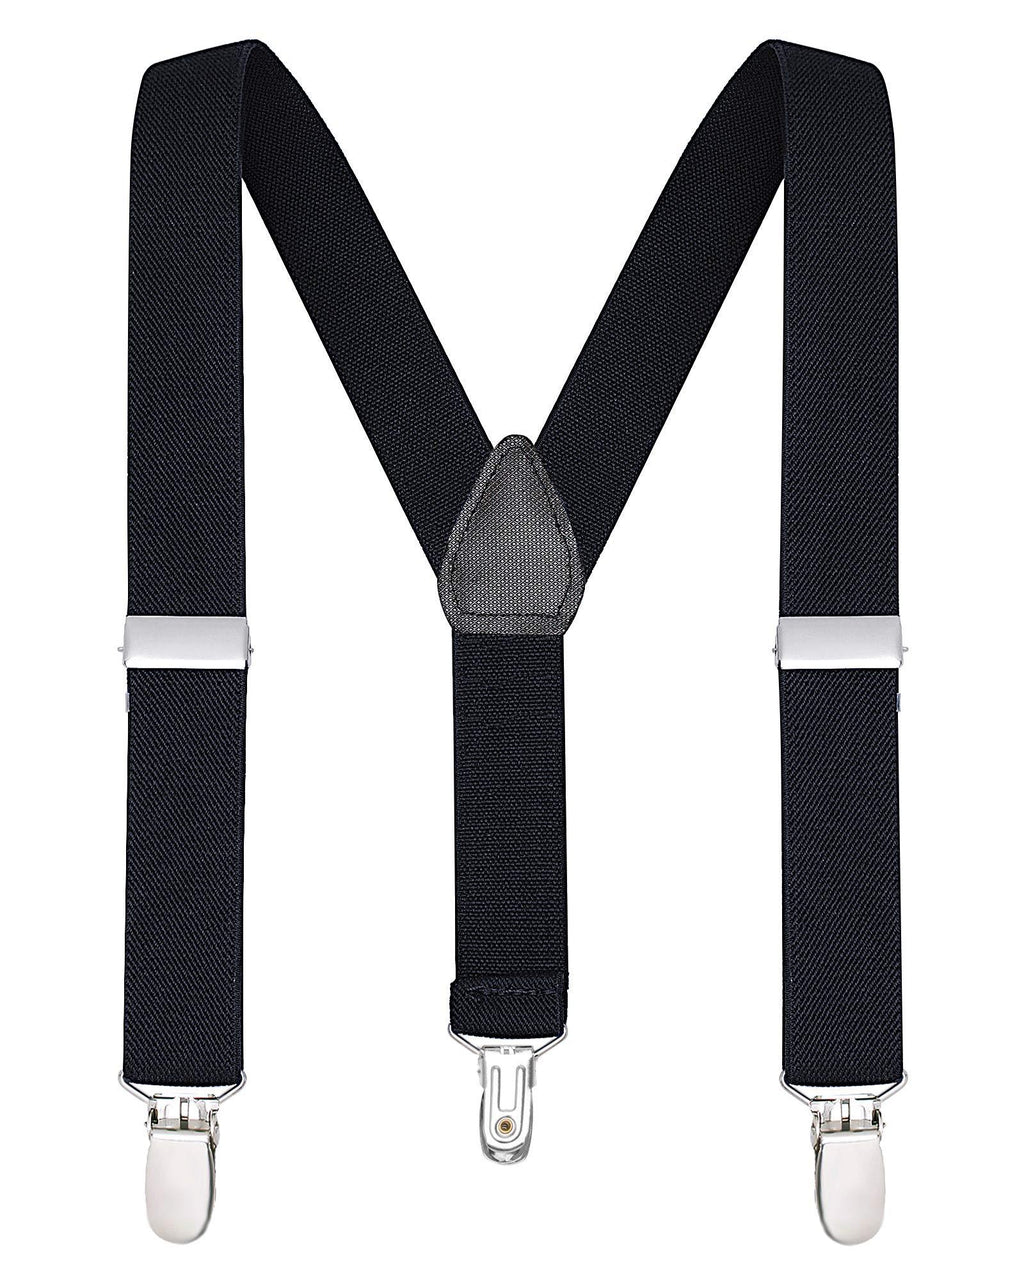 [Australia] - Buyless Fashion Adjustable Suspenders for Kids Toddlers Baby Elastic Solid Color 1 Inch - Y Back Design 22 Inch/7 Months - 3 Years Black 